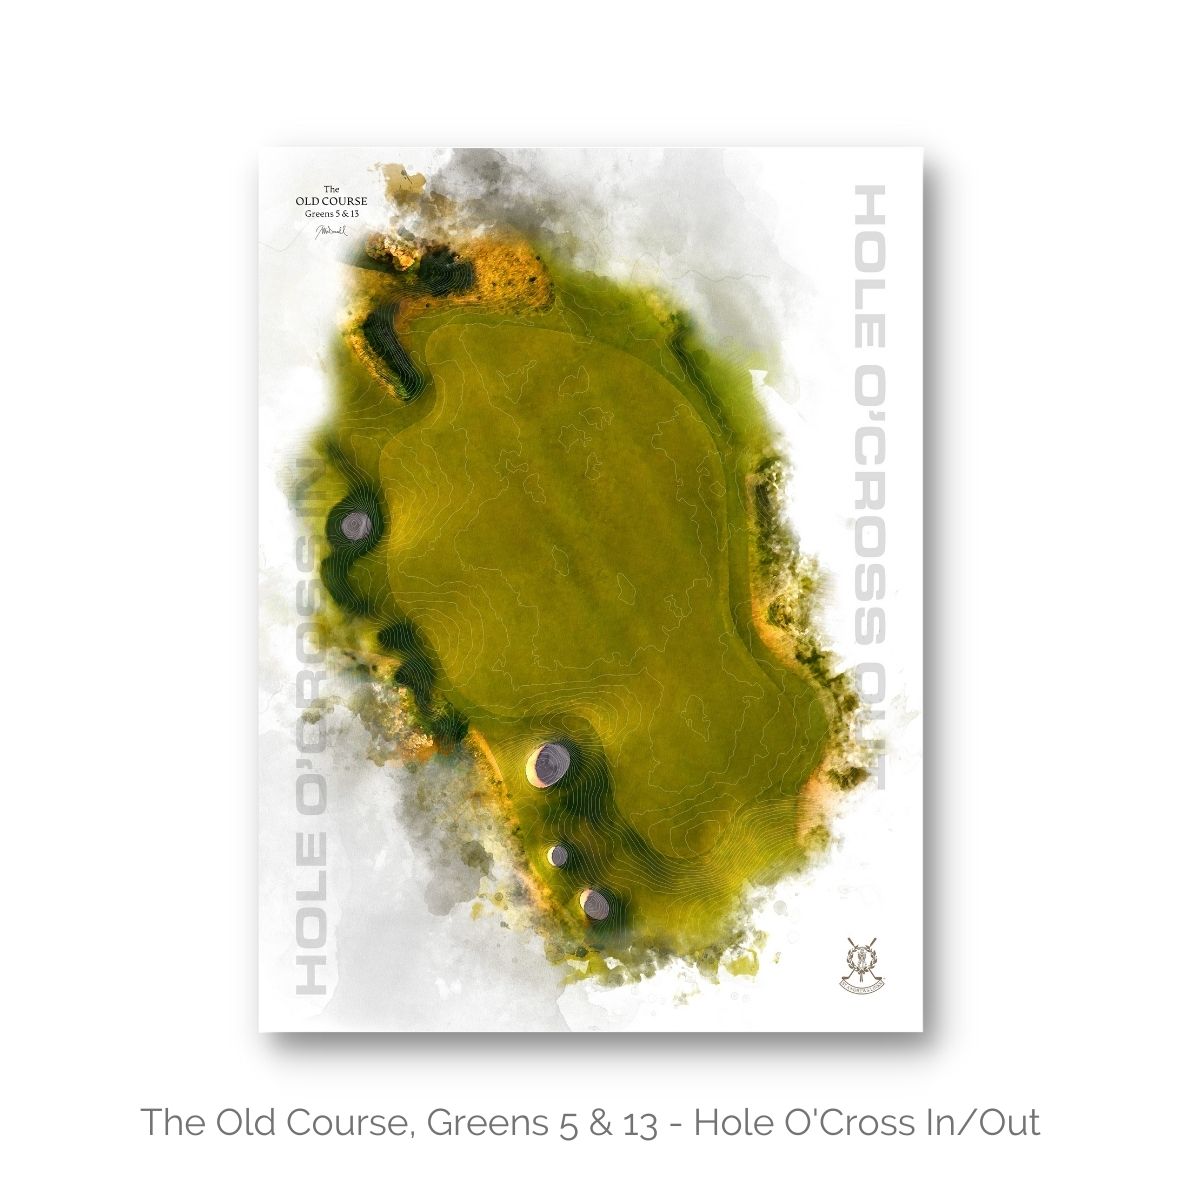 The Old Course Green 5 & 13, Hole O'Cross Print by Joe McDonnell